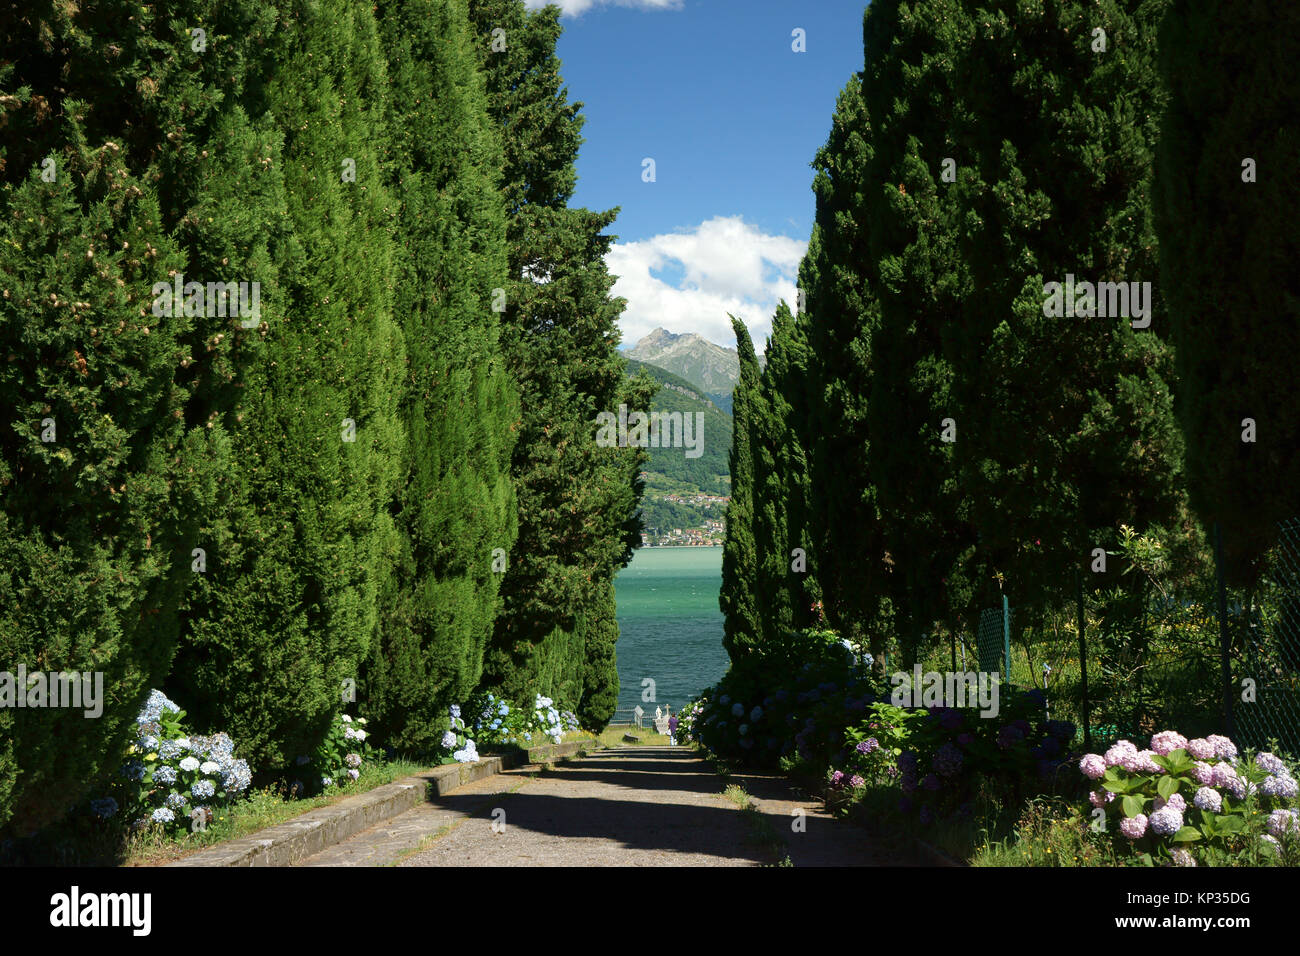 Foot path flanked by Cypress trees leading to shore of lake Como at Abbey of Piona, Lecce, Italy Stock Photo